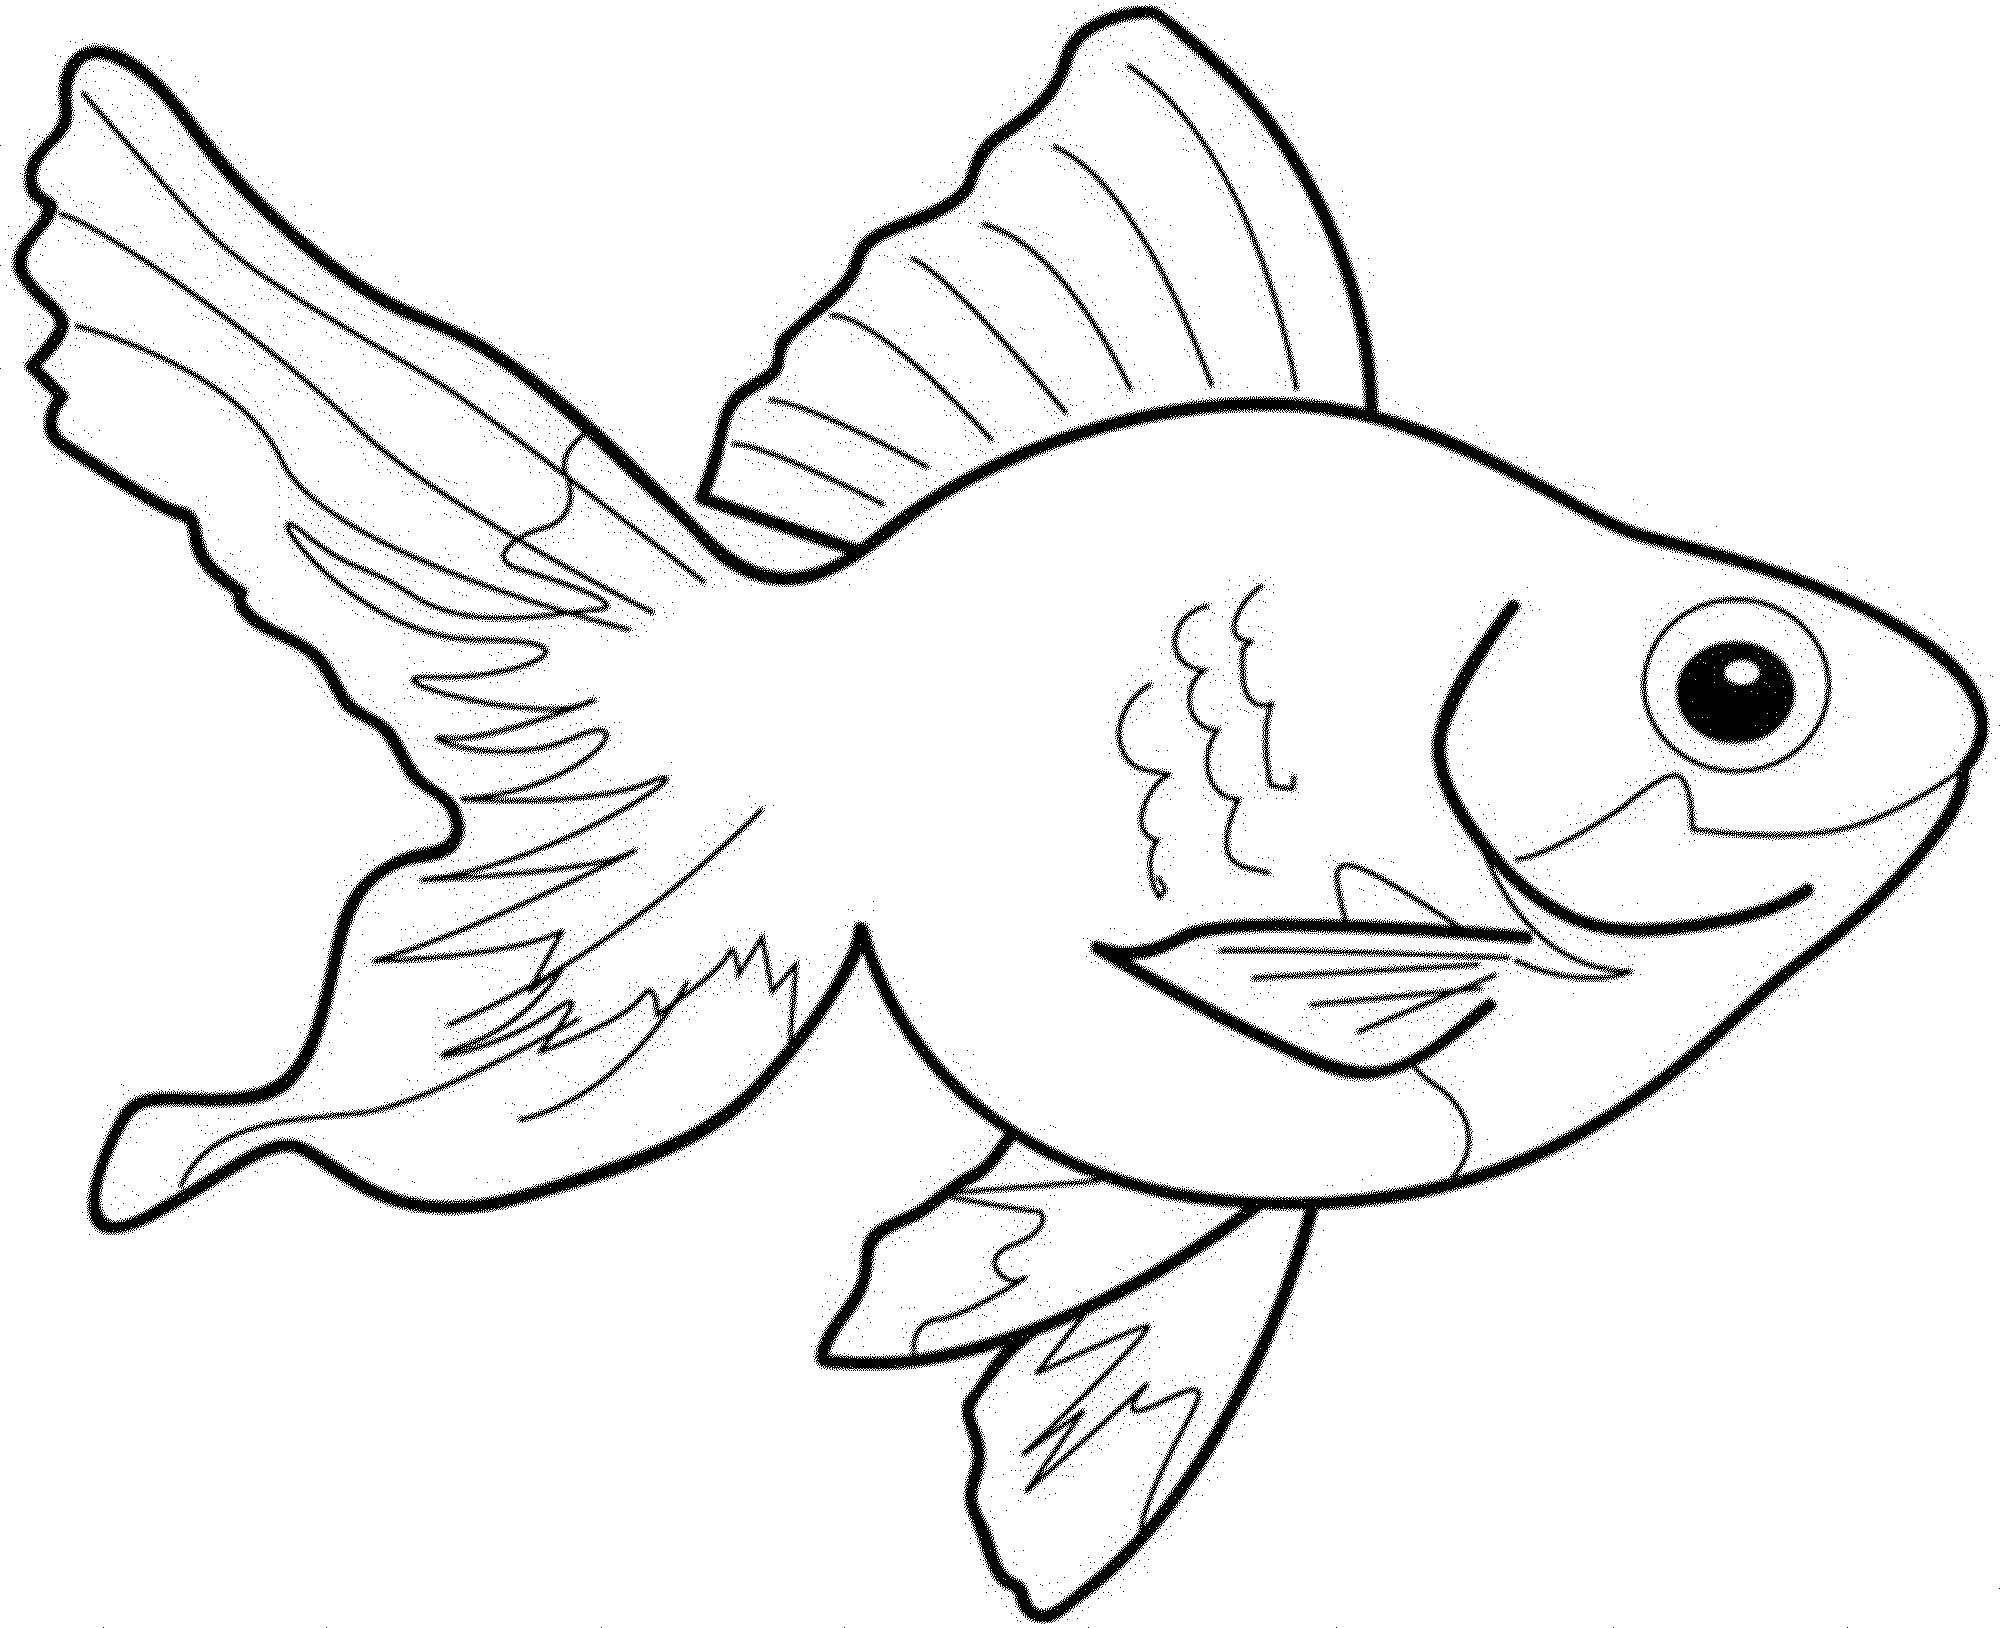 Print & Download - Cute and Educative Fish Coloring Pages